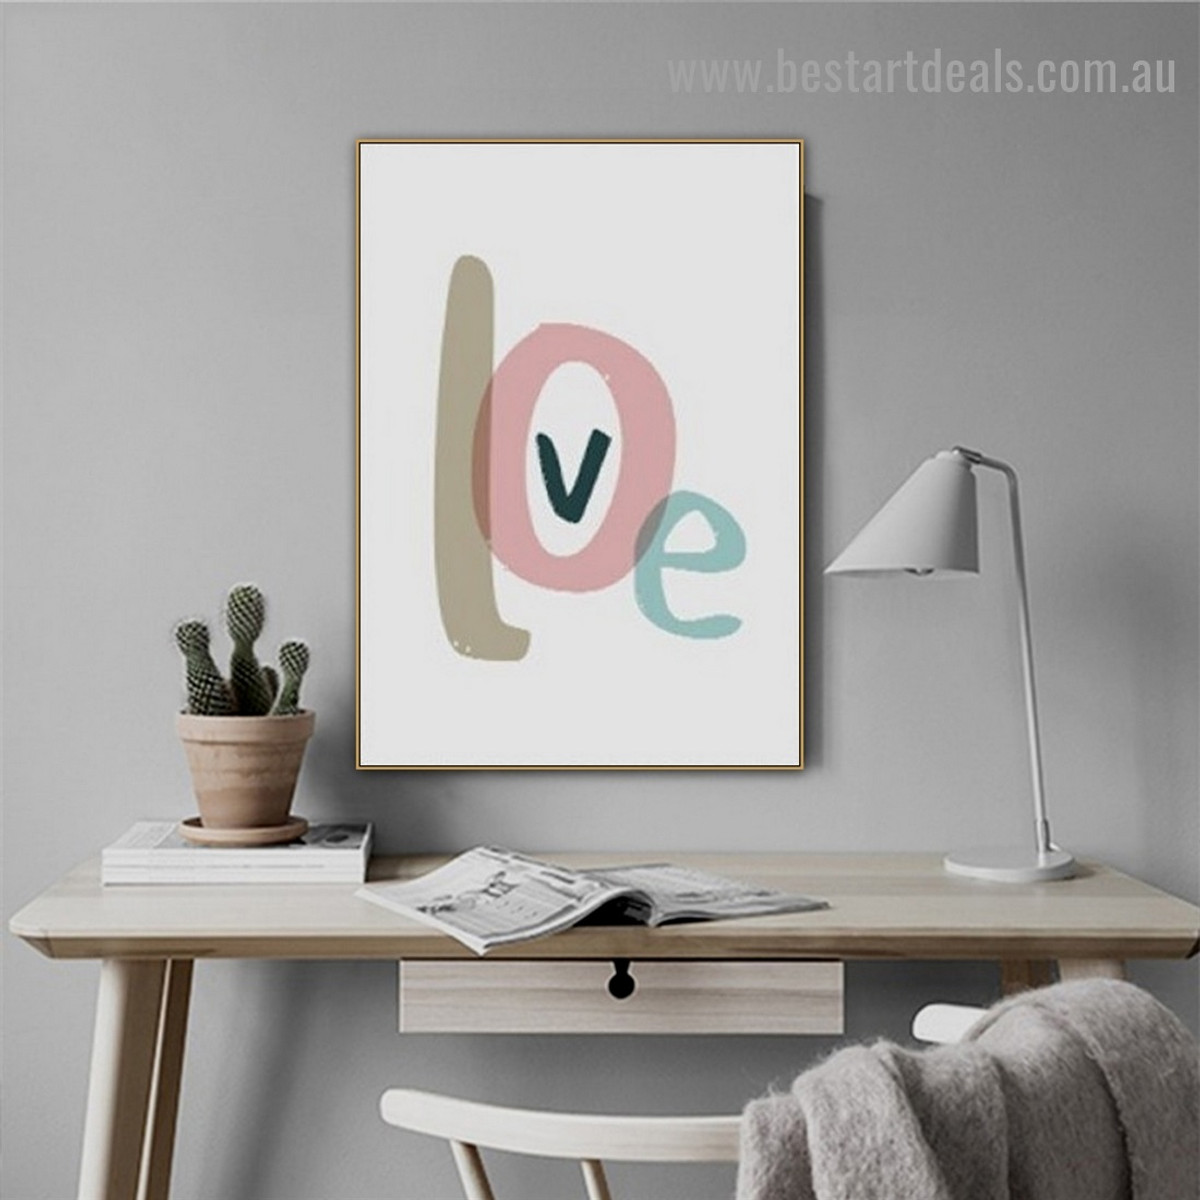 Love Color Typography Scandinavian Framed Artwork Photo Canvas Print for Room Wall Ornament